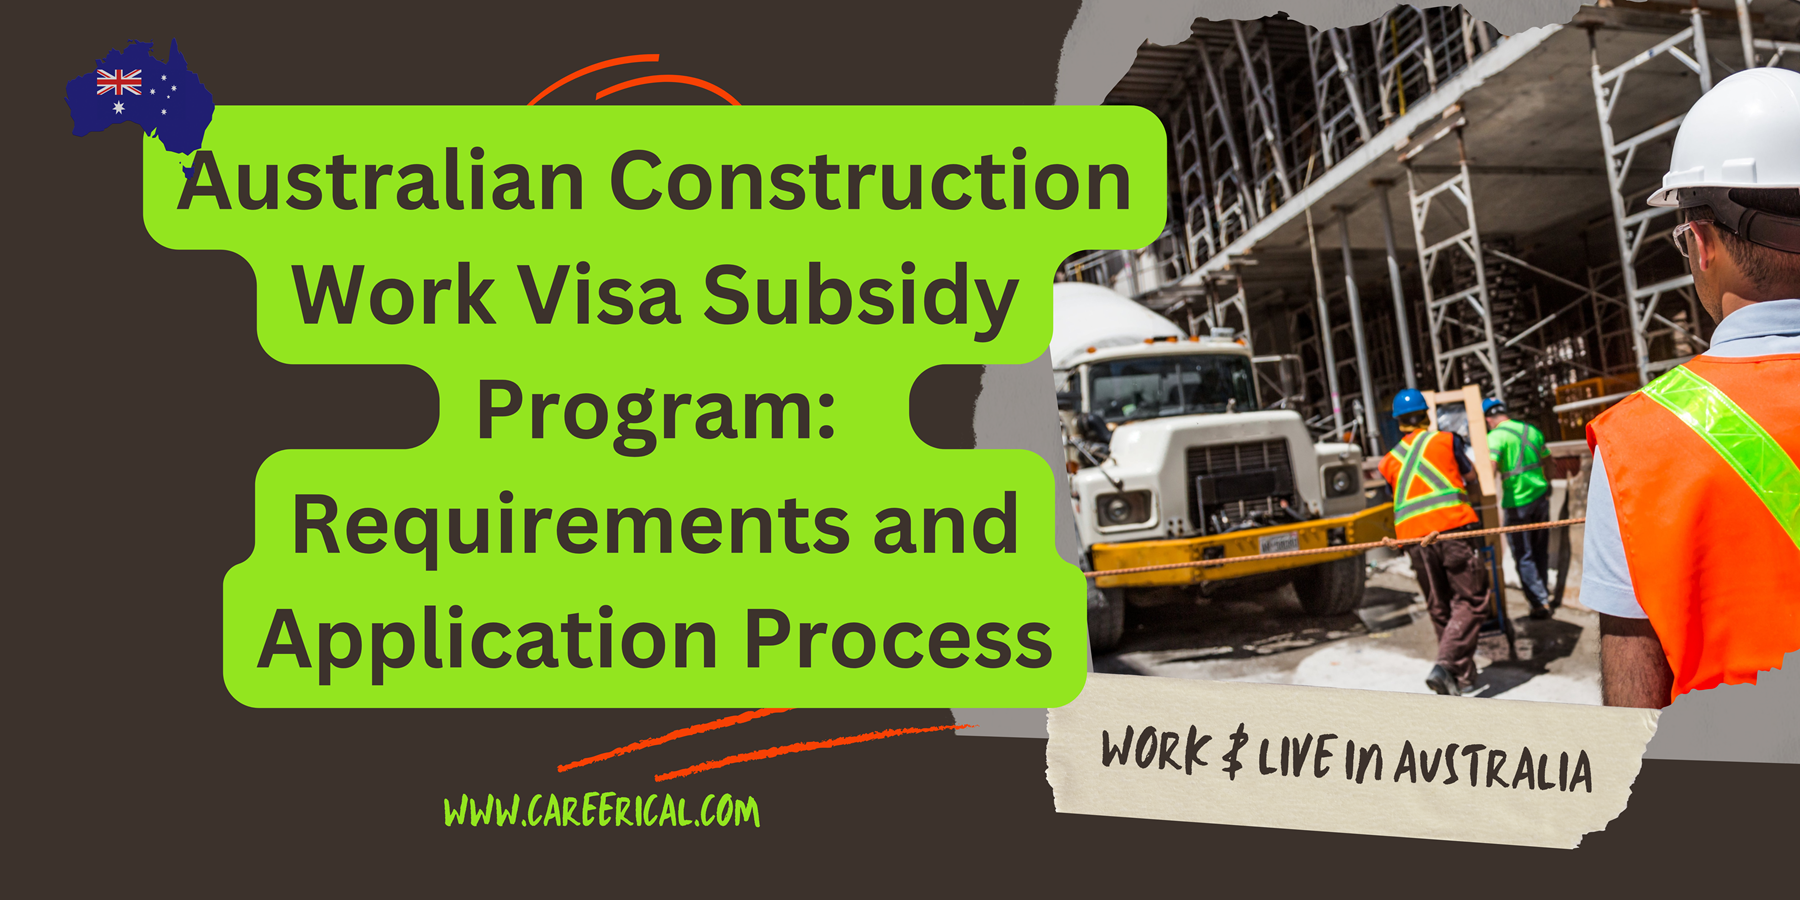 Australian Construction Work Visa Subsidy Program Guide to Requirements and How to Apply